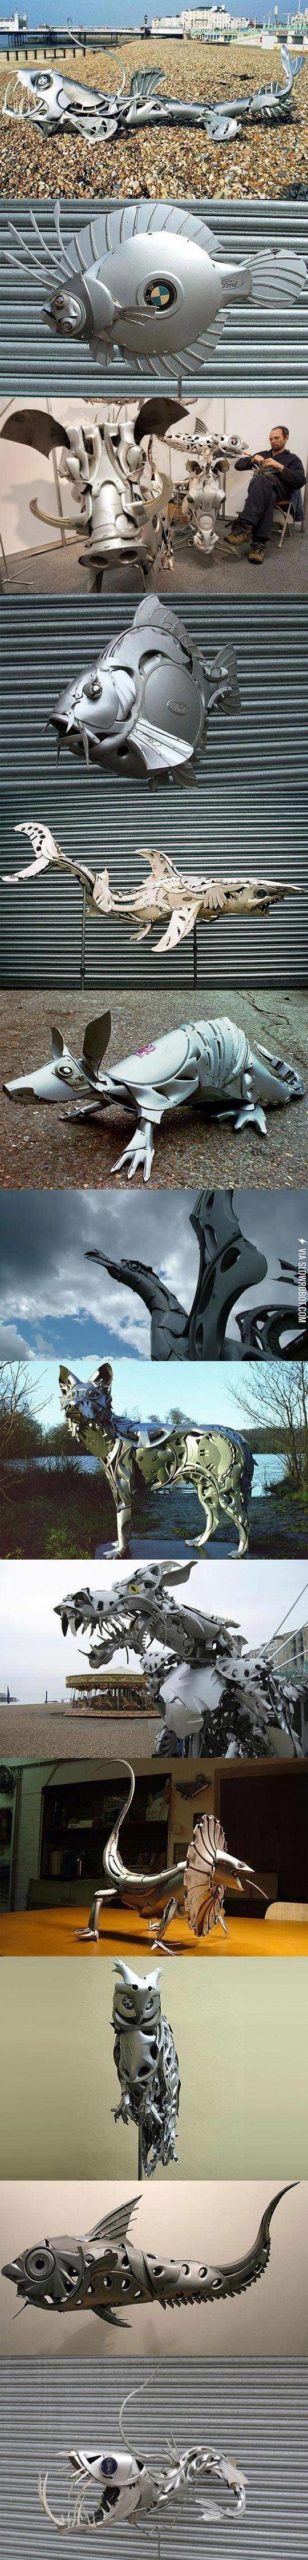 Awesome+Hubcap+Sculptures